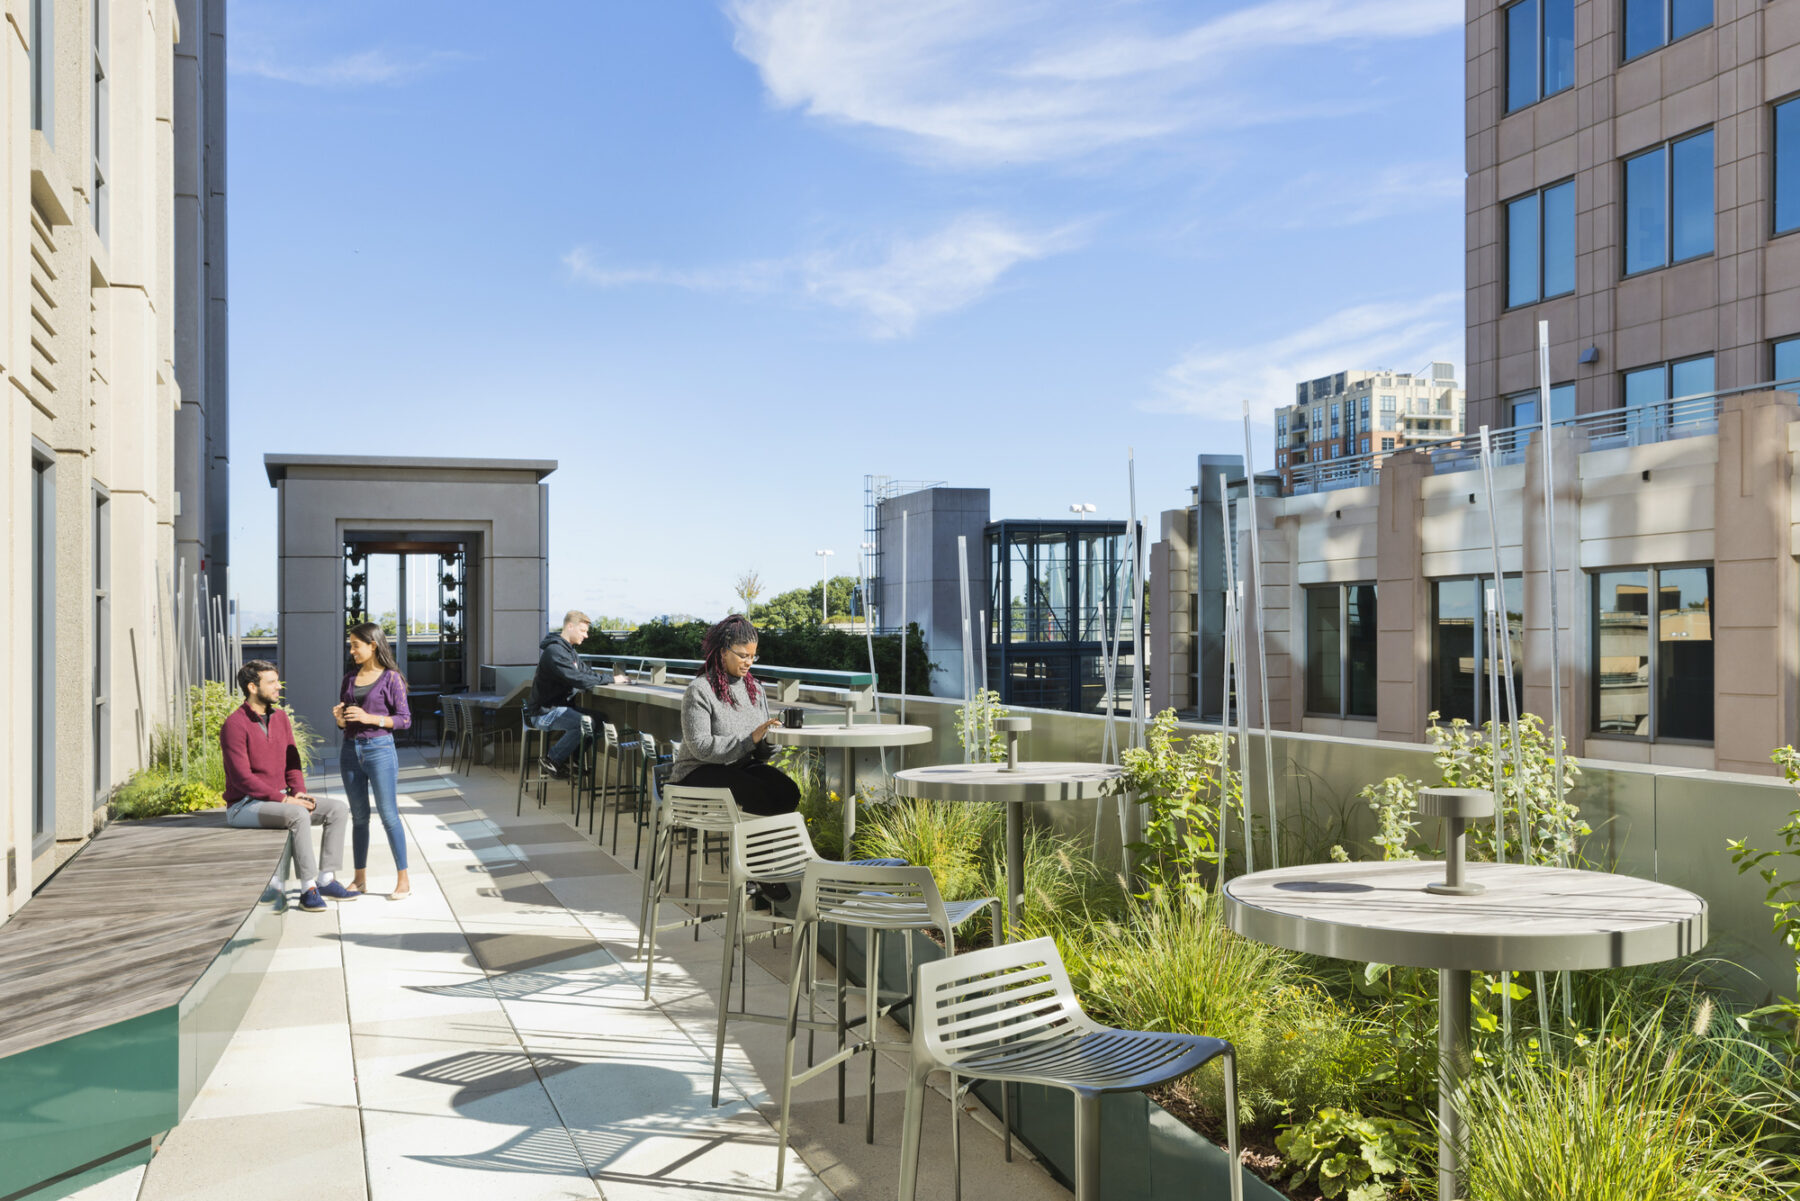 View of roof terrace with tall tables and garden beds with vegetation